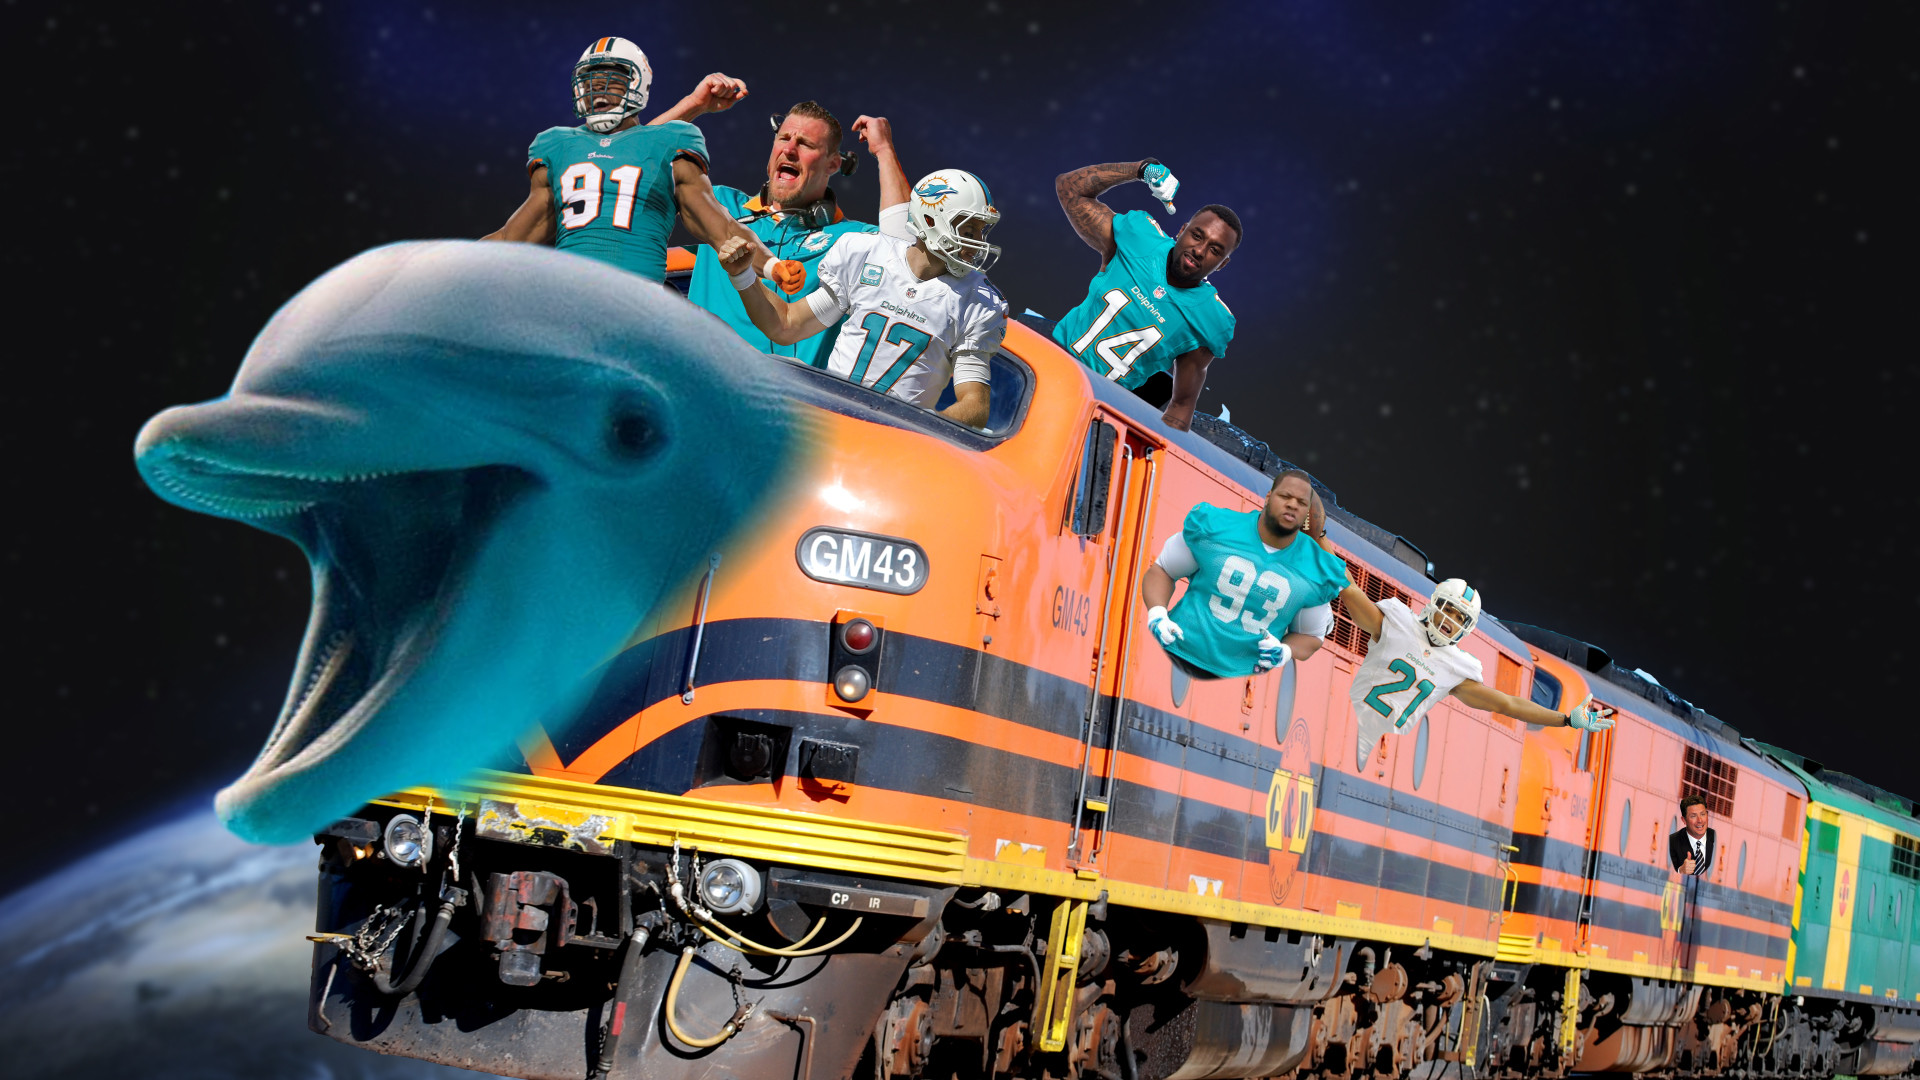 1920x1080 THE DAN CAMPBELL HYPE TRAIN IS BACK ON TRACK